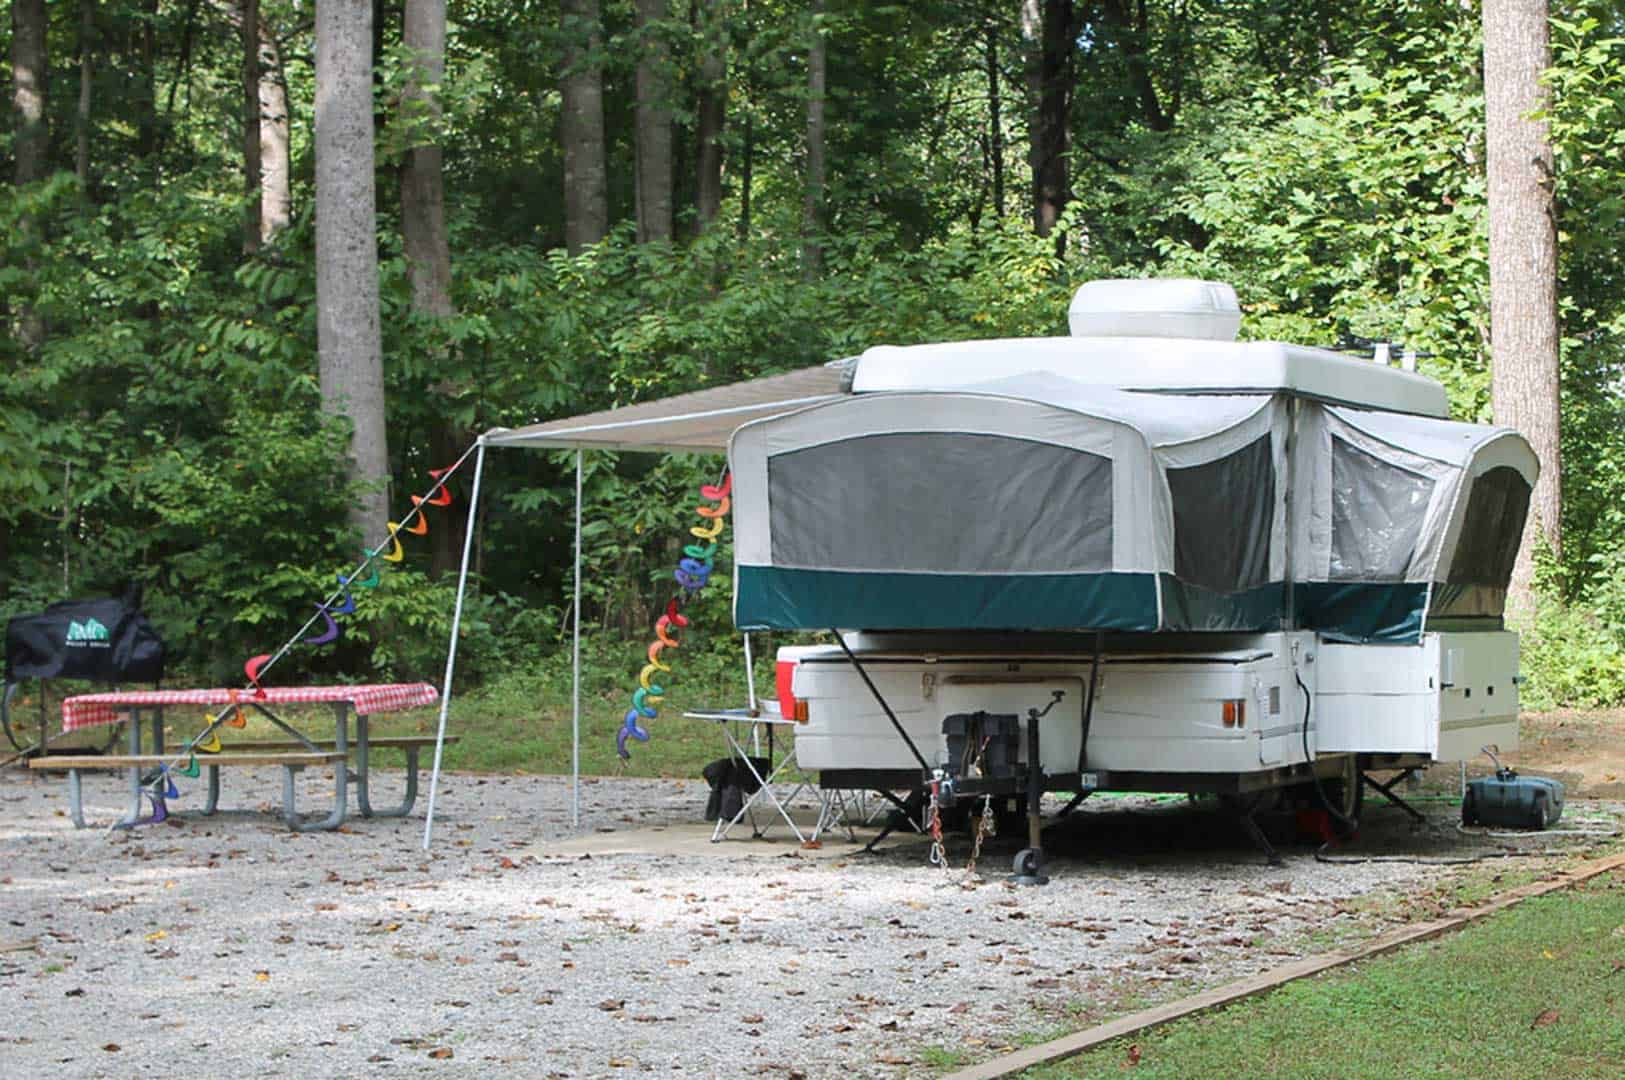 How Much Does A Pop Up Camper Weigh?